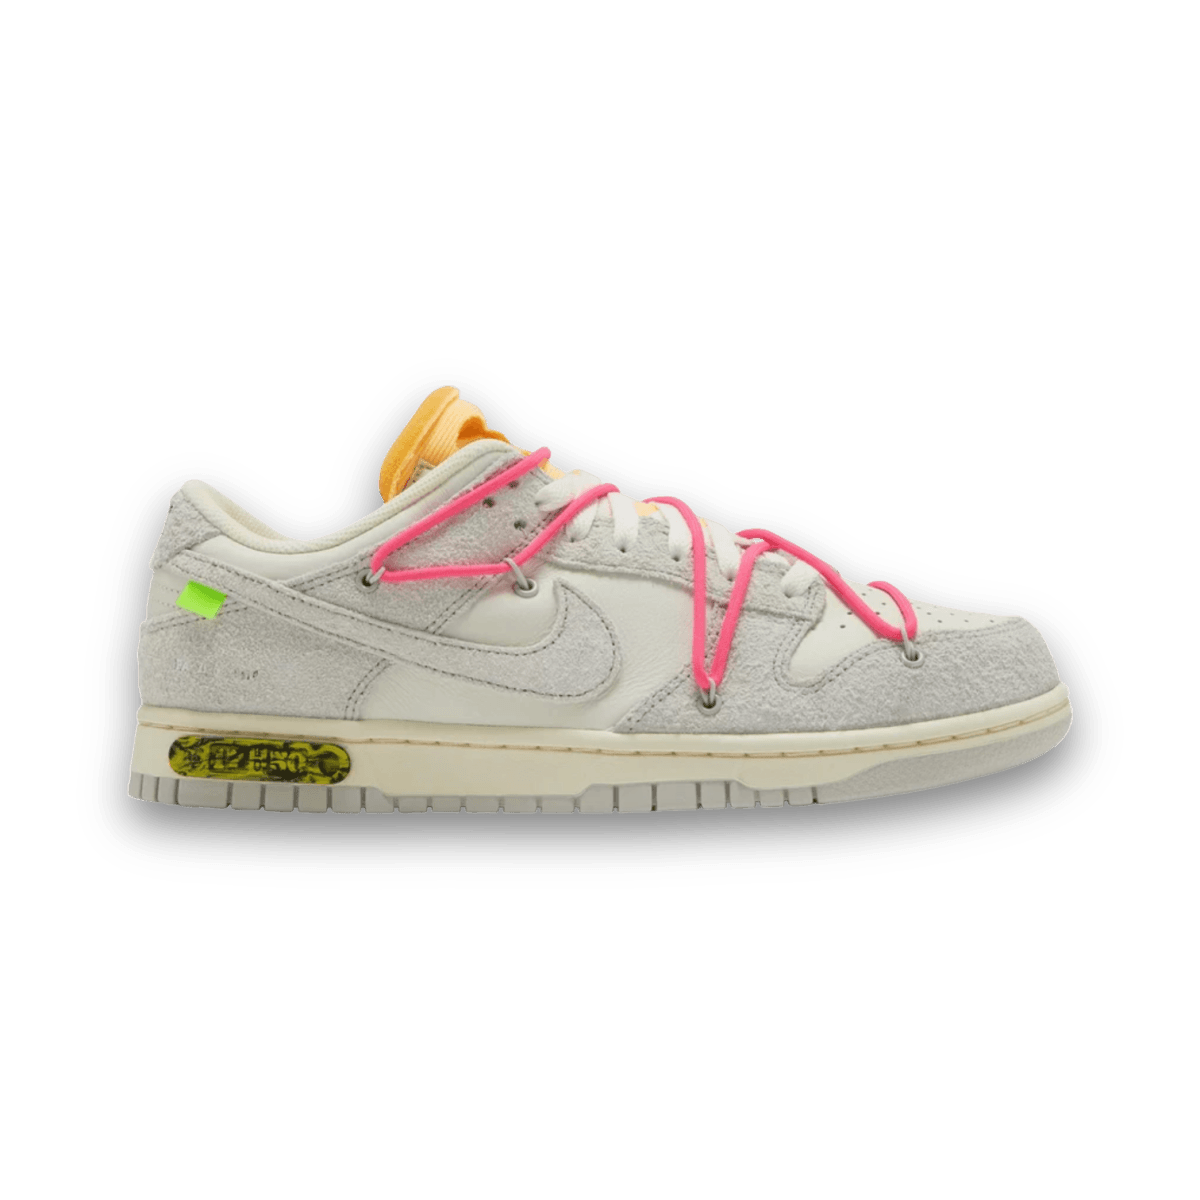 Off-White x Dunk Low 'Lot 17 of 50' - Low Sneaker - Dunks - Jawns on Fire